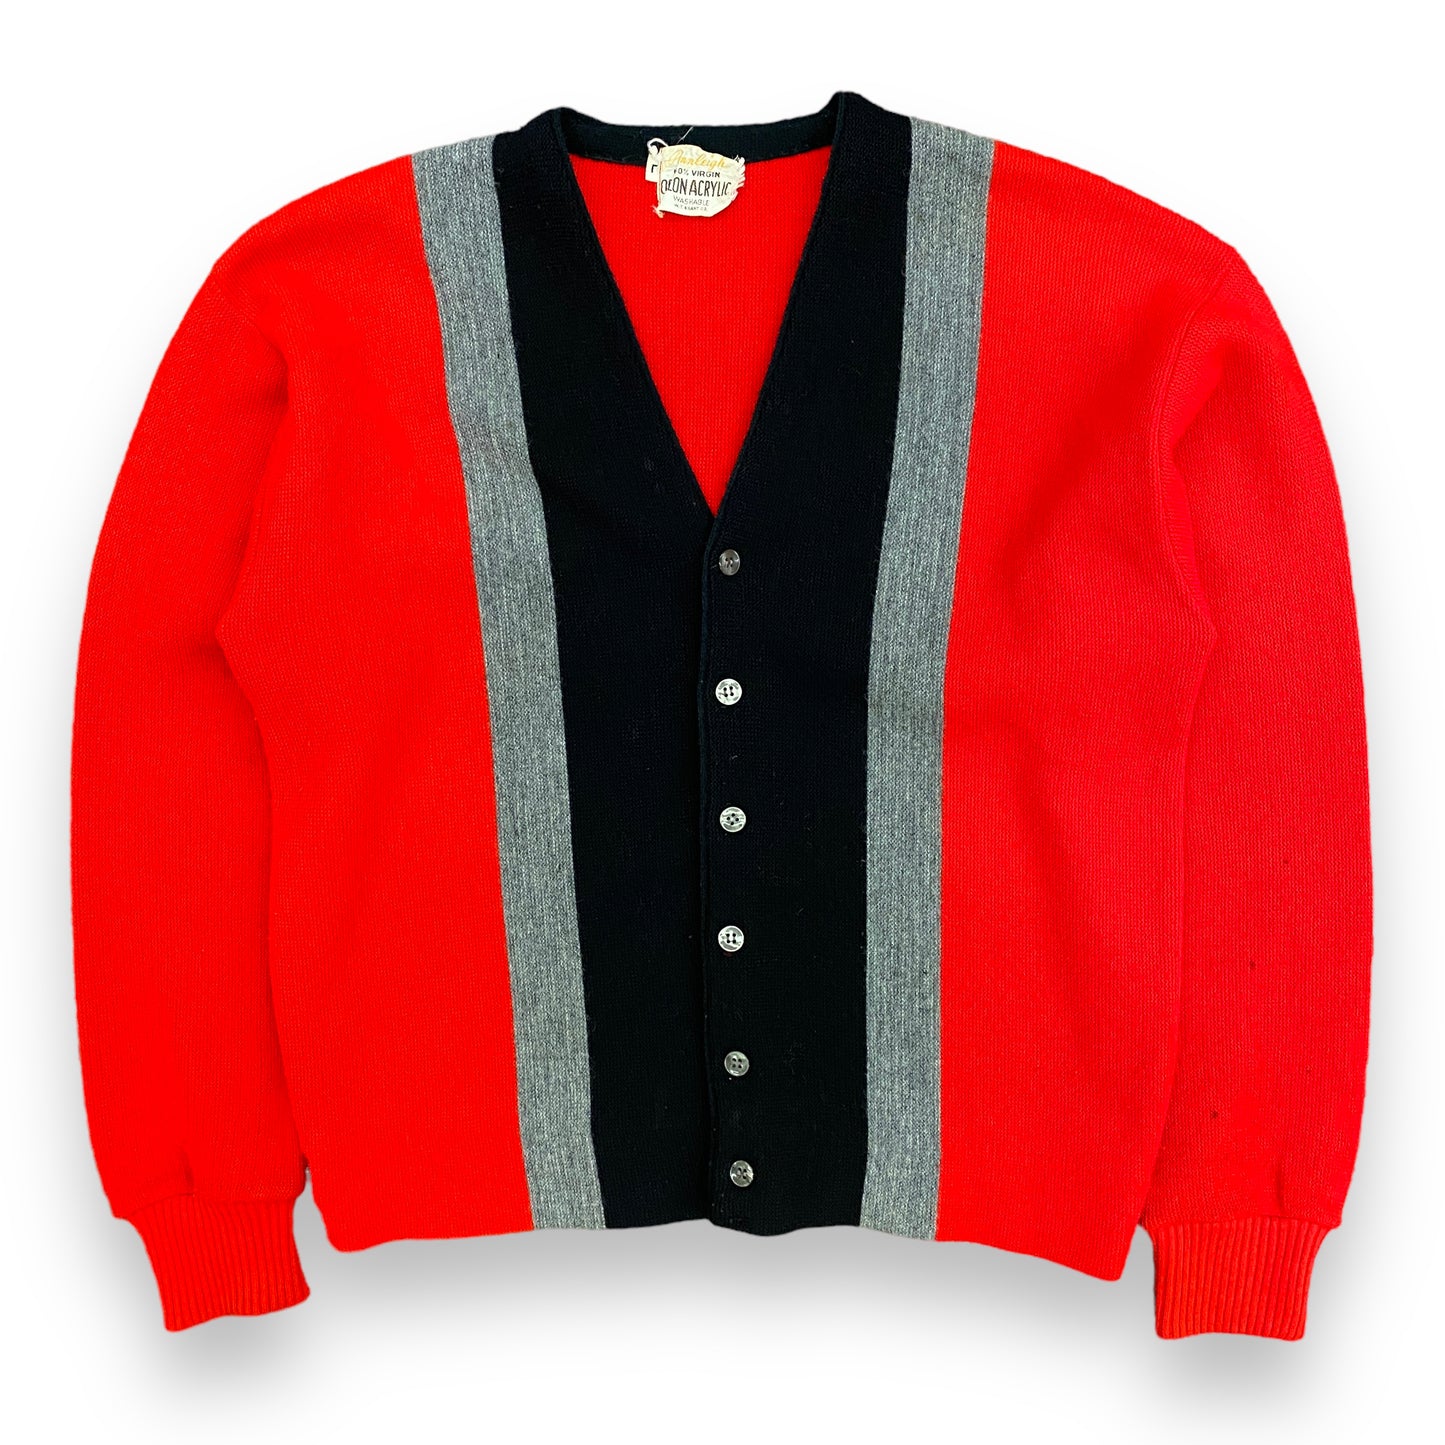 Vintage 1960s Pennleigh Red and Black Knit Cardigan - Size Large